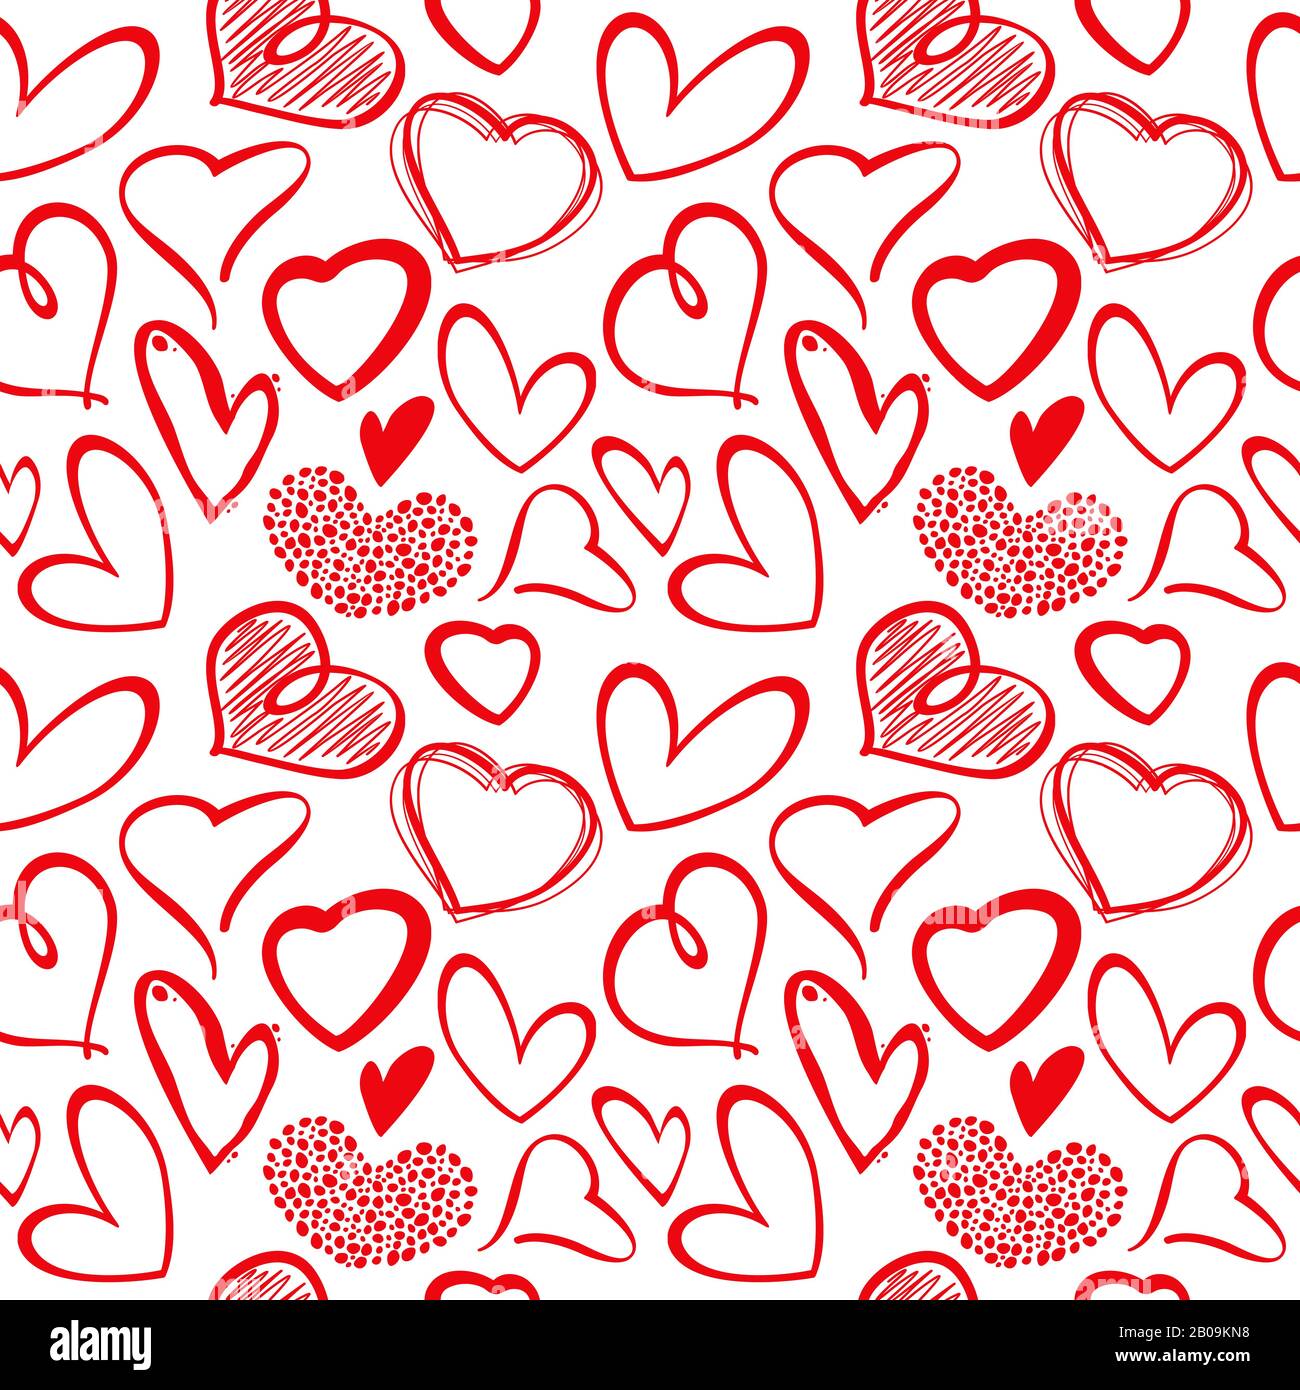 Love heart seamless vector pattern. Seamless vintage background with sketch hearts, illustration of artistic drawing heart Stock Vector